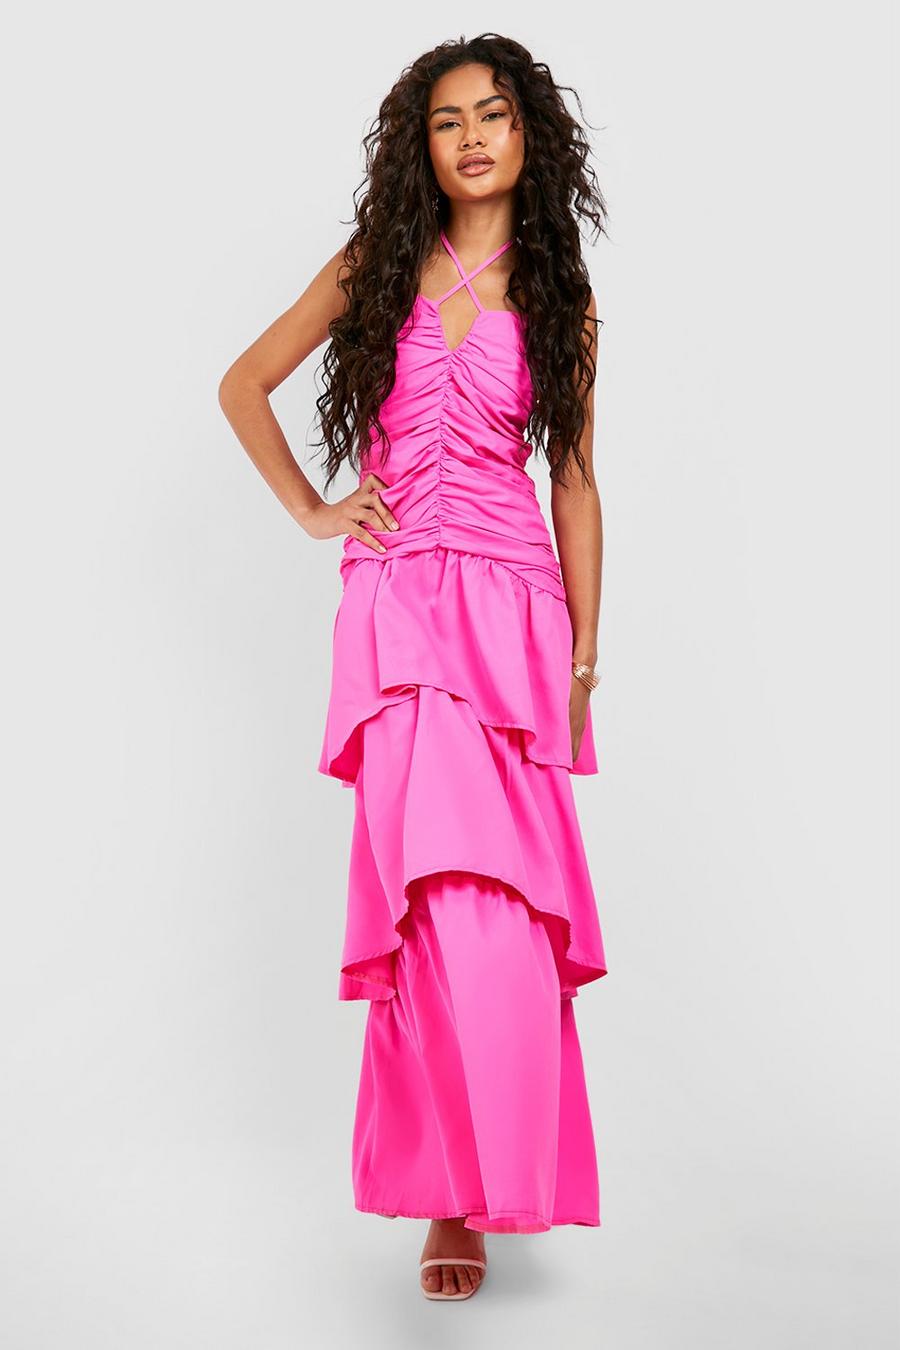 Bright pink Ruched Bodice Frill Skirt Maxi Dress